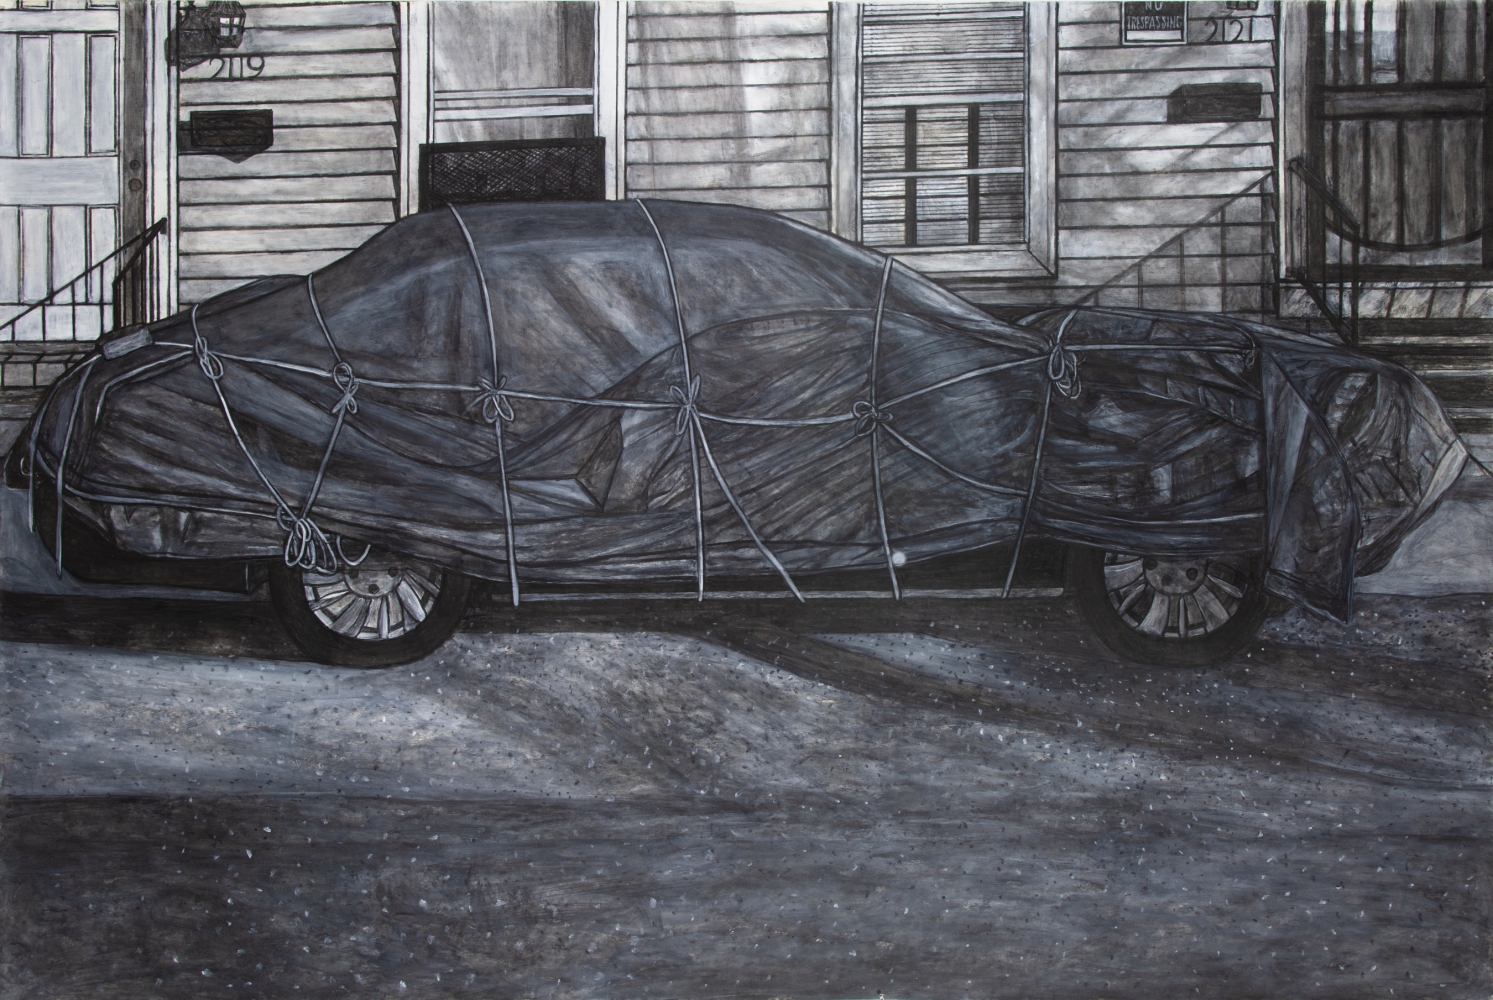 Covering, 2015
Acrylic and charcoal on paper
60.5 x 90&amp;nbsp;inches